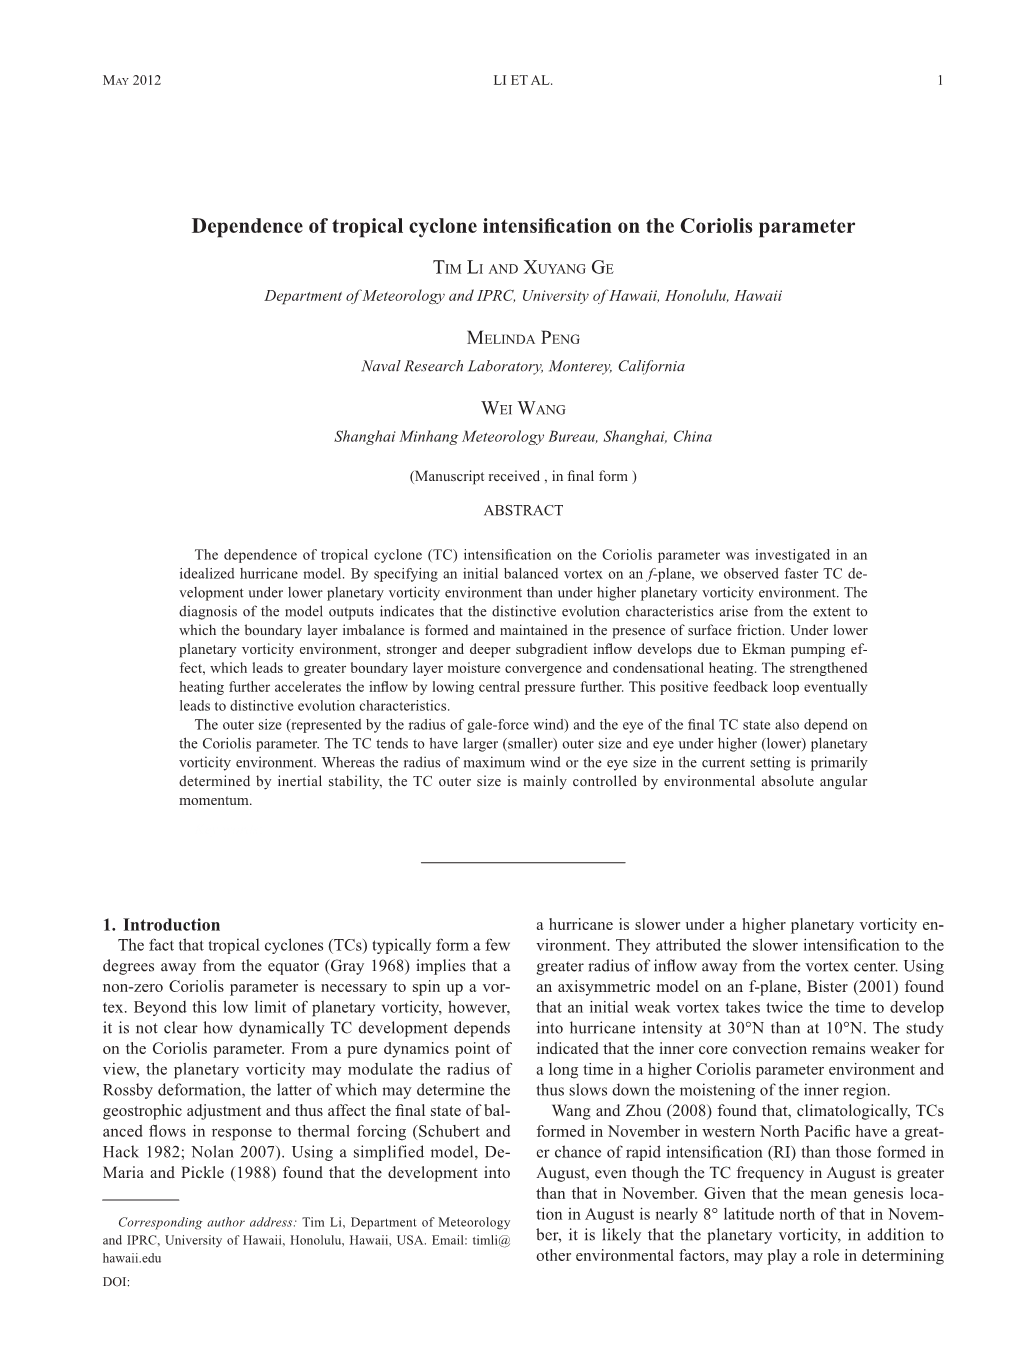 Dependence of Tropical Cyclone Intensification on the Coriolis Parameter